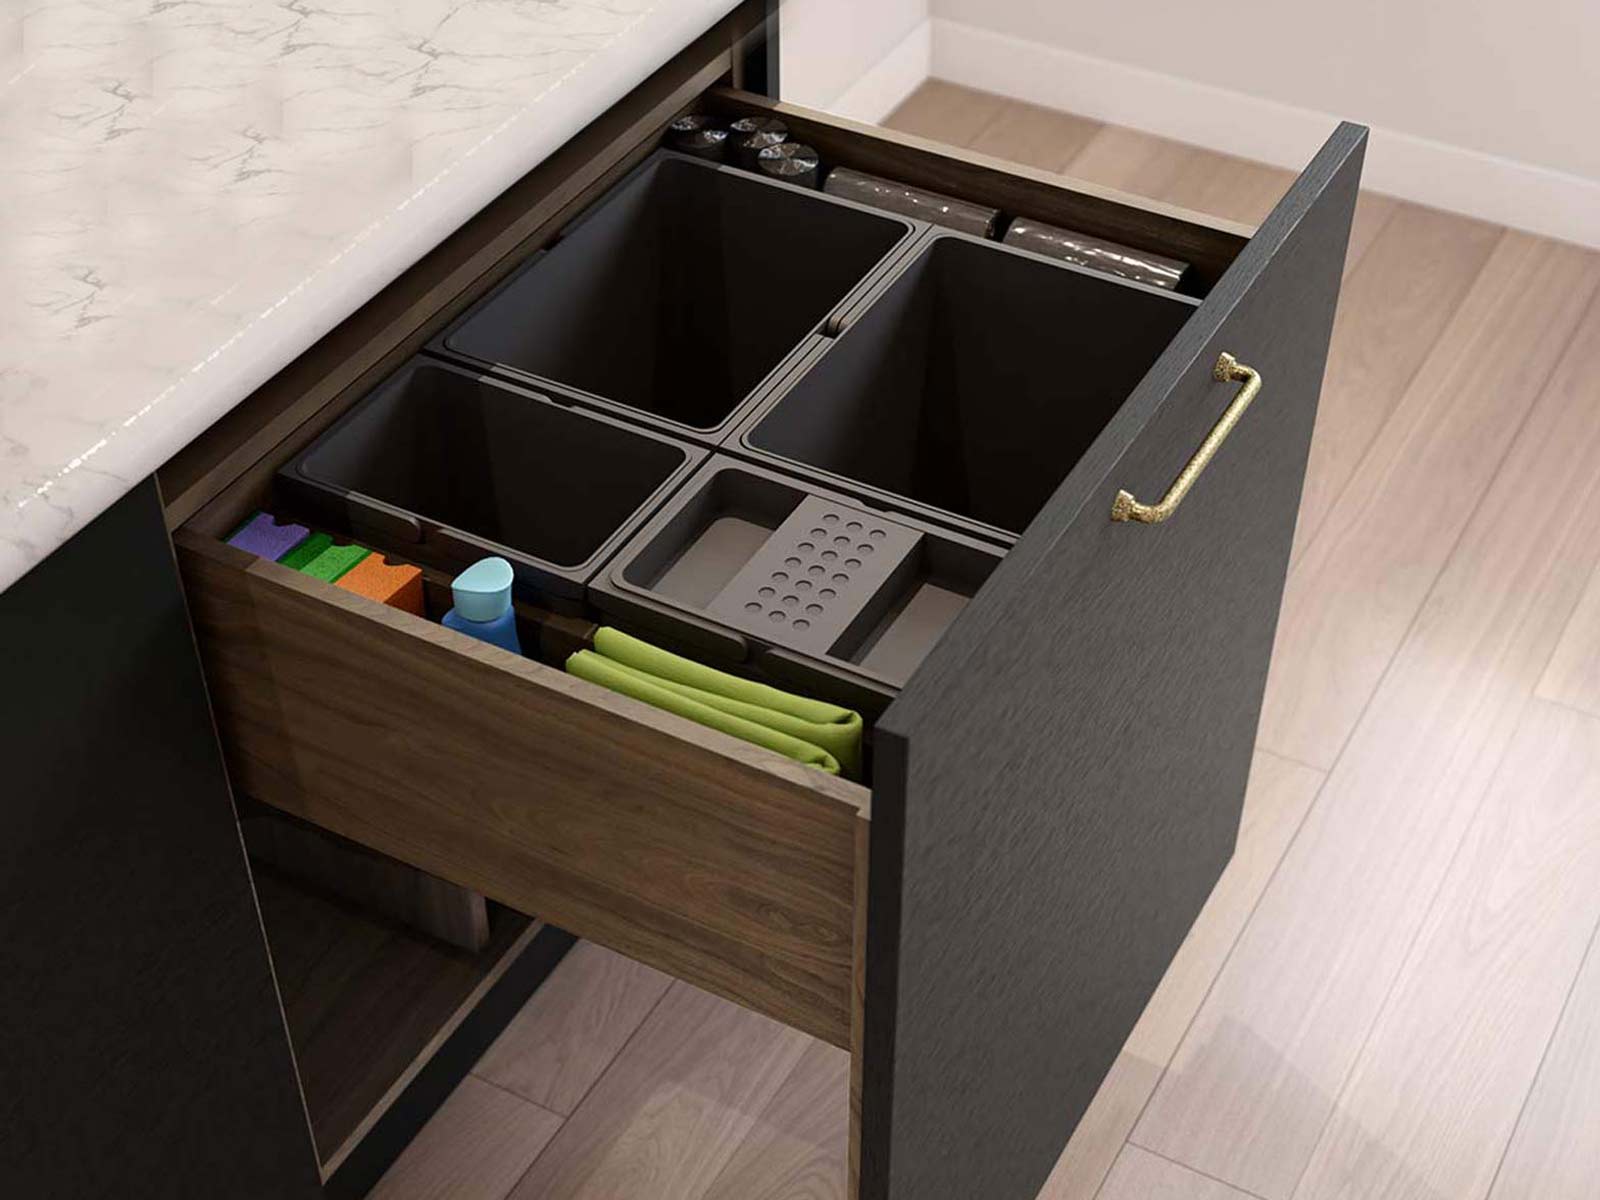 A black kitchen bin for inside a cupboard and a kitchen bin with a lid